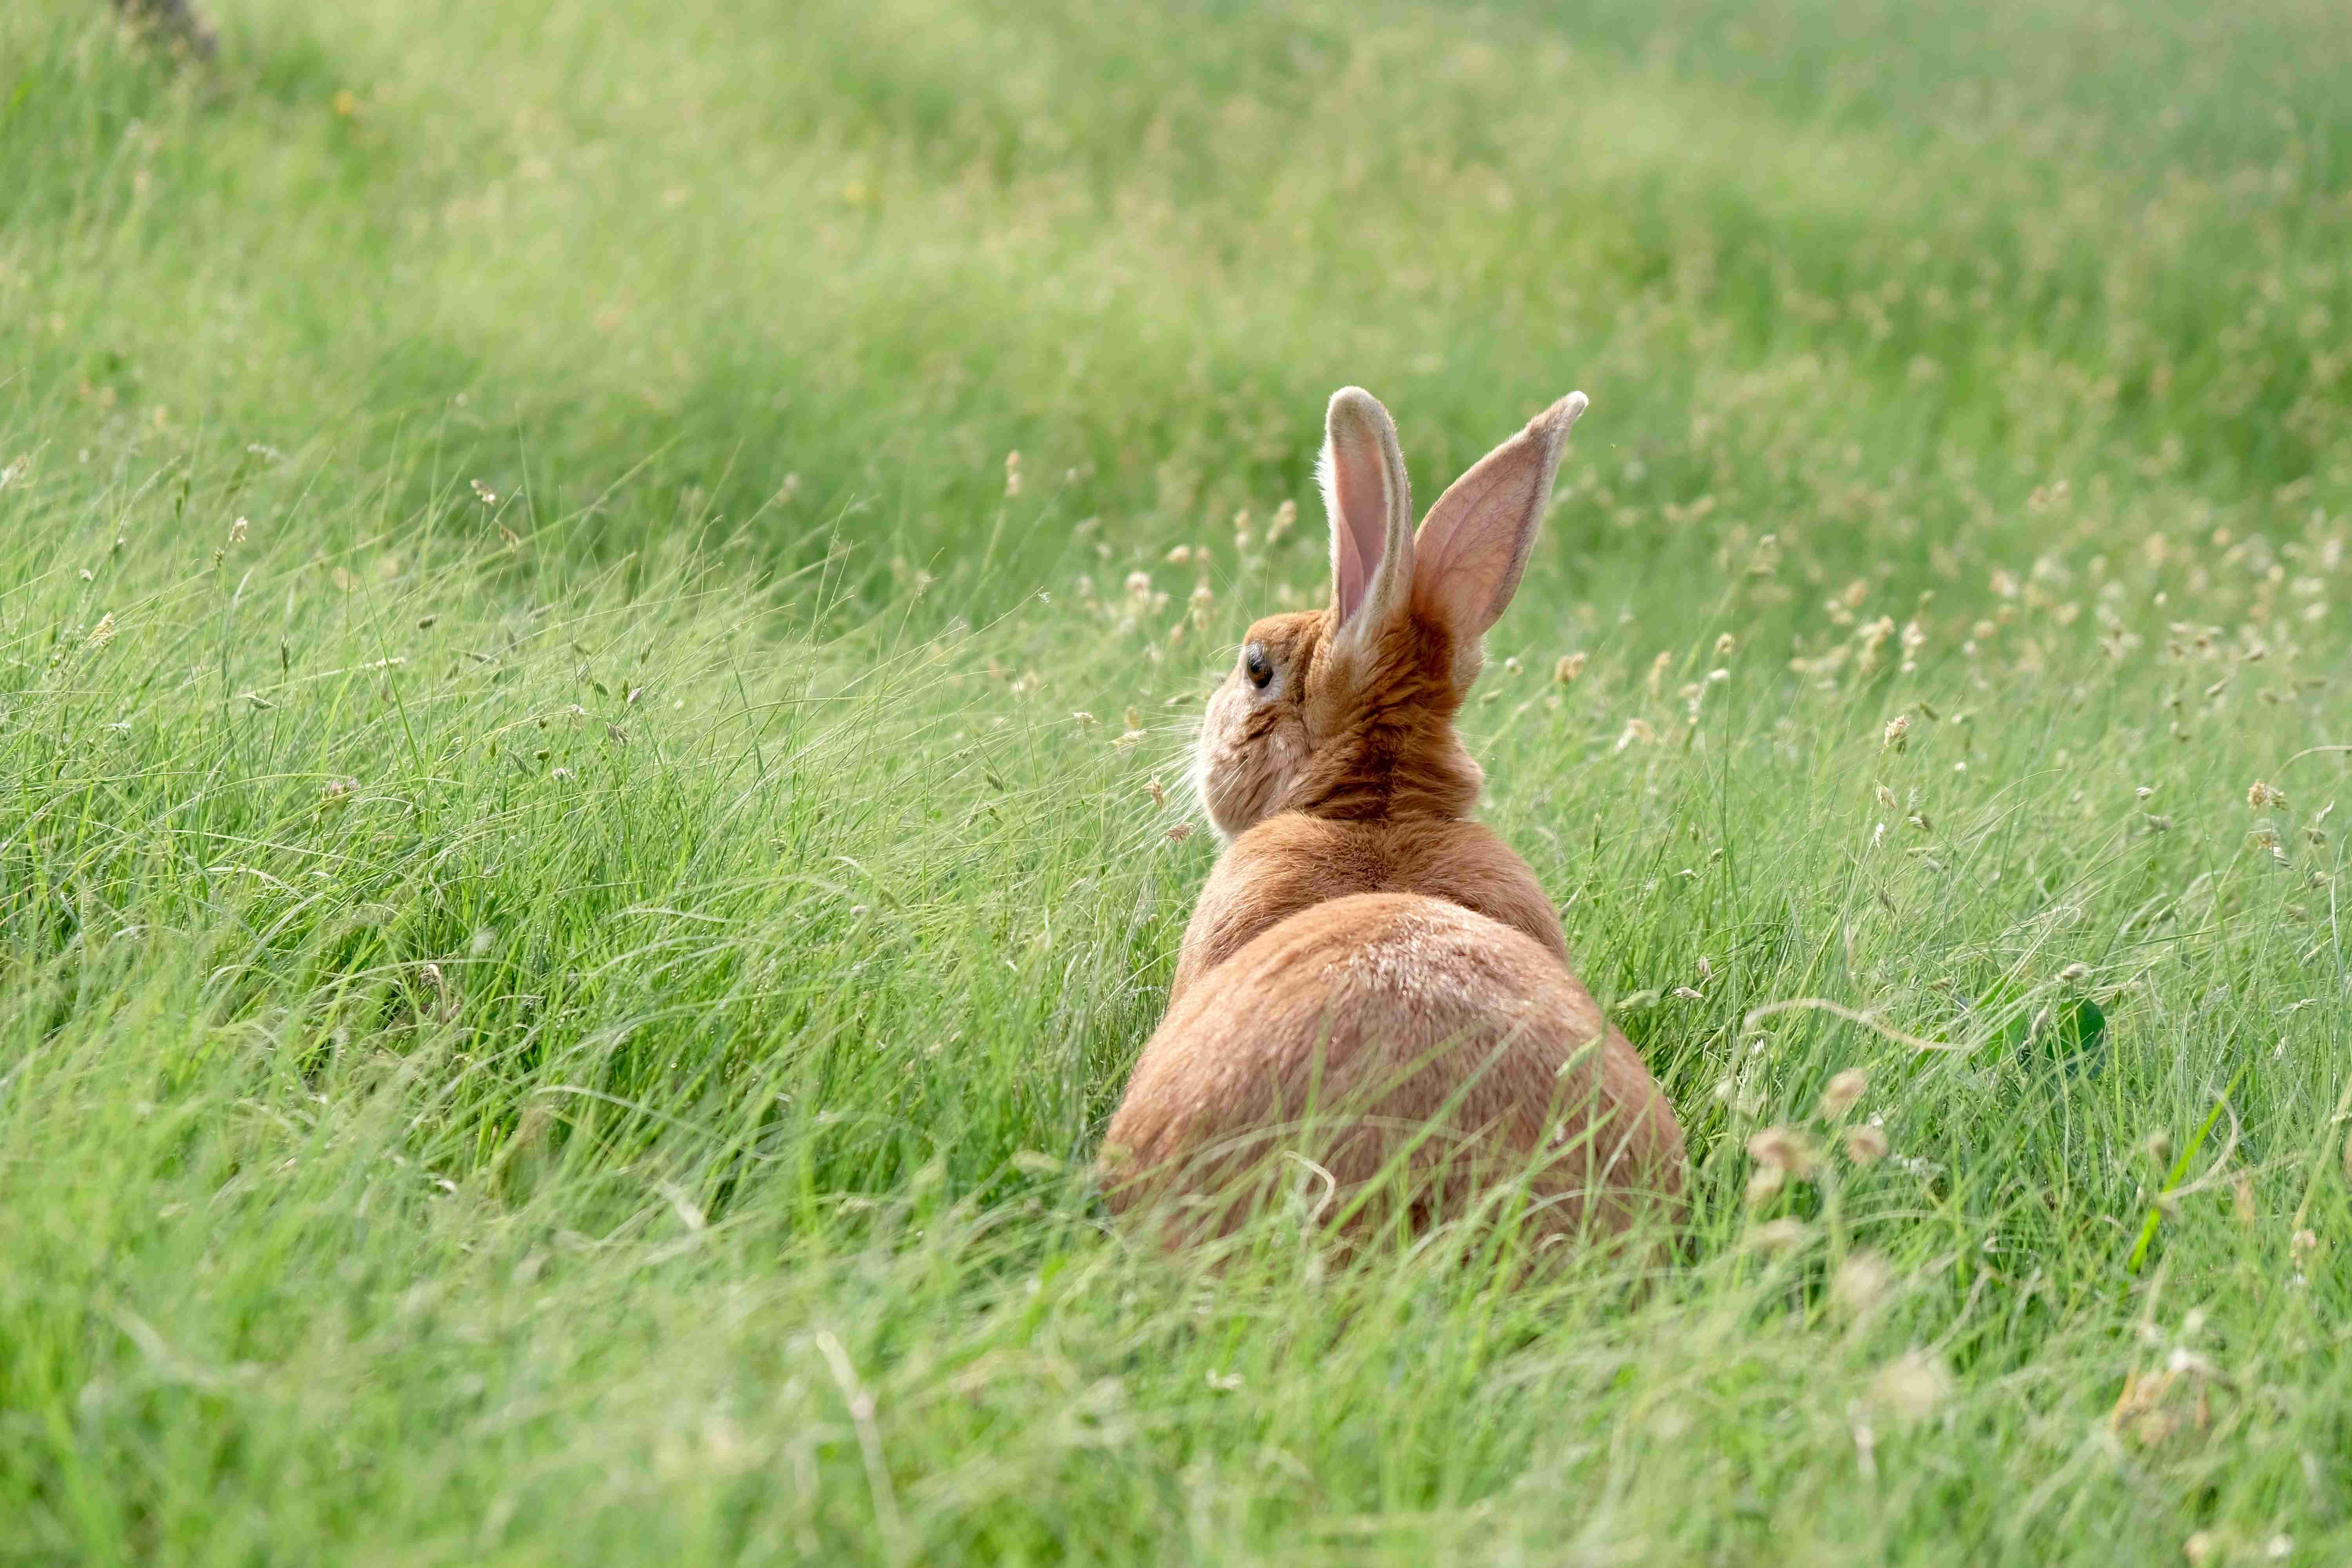 5 Proven Tips to Stop Your Rabbit from Biting or Scratching You